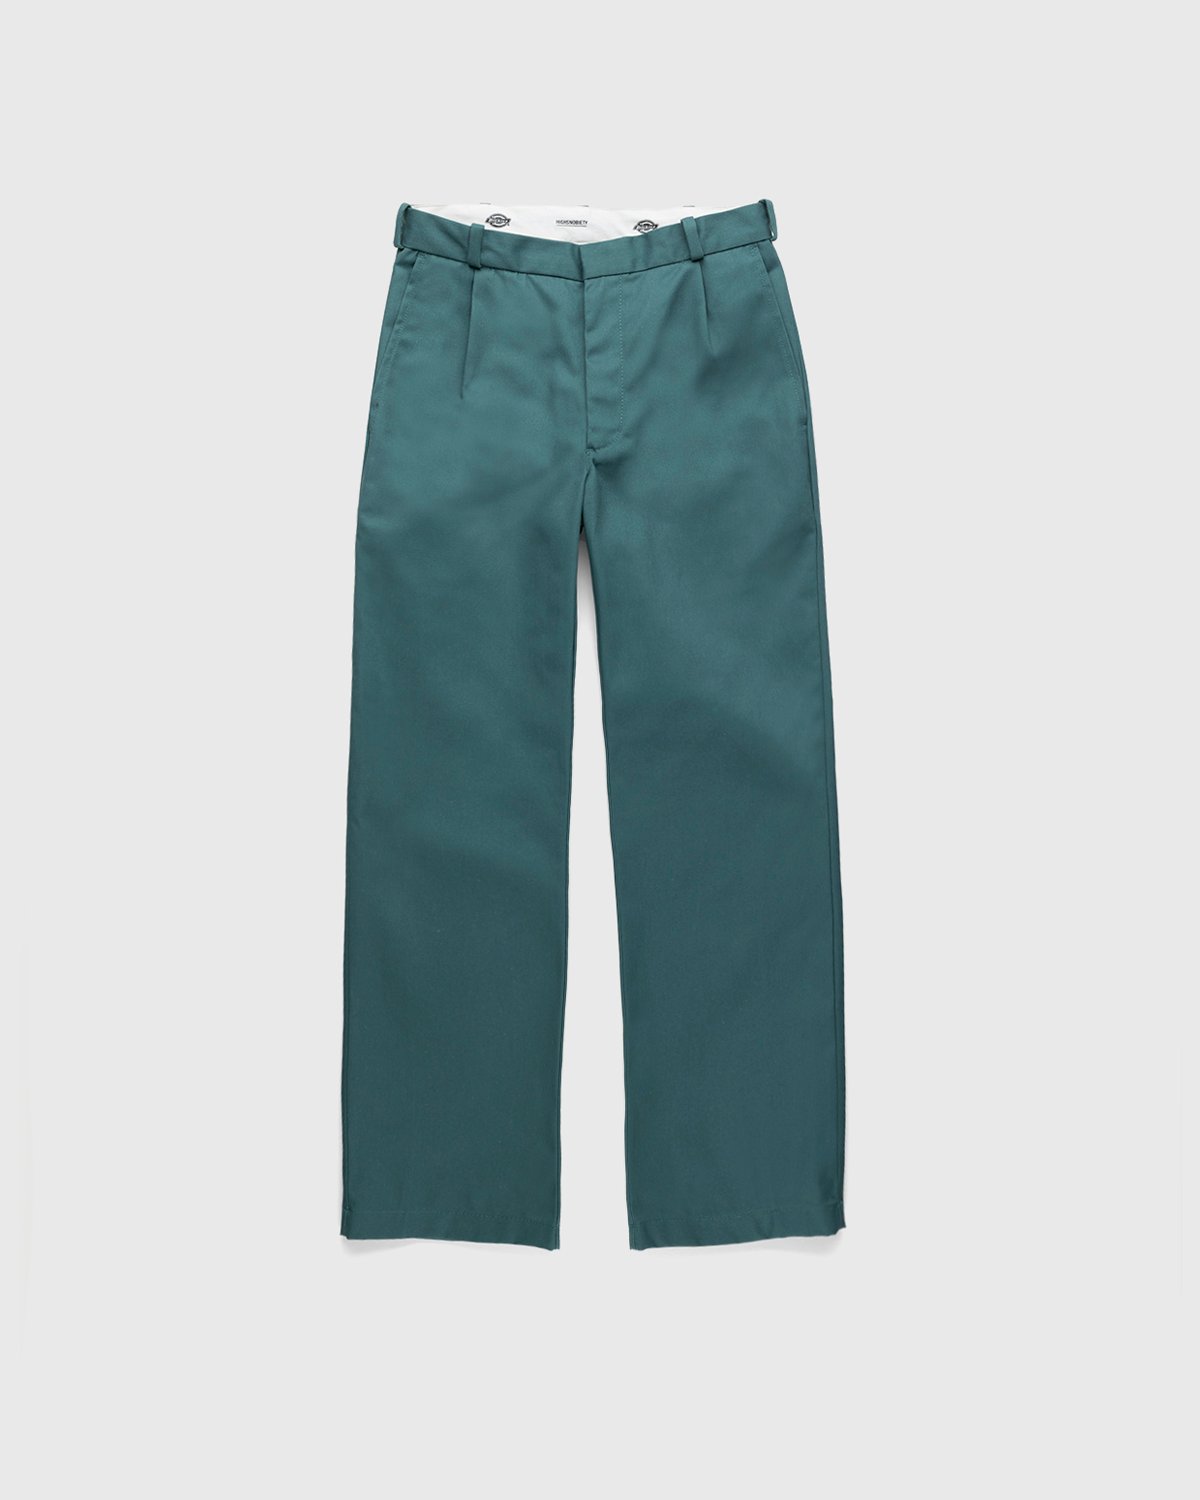 Highsnobiety x Dickies - Pleated Work Pants Lincoln Green - Clothing - Green - Image 1